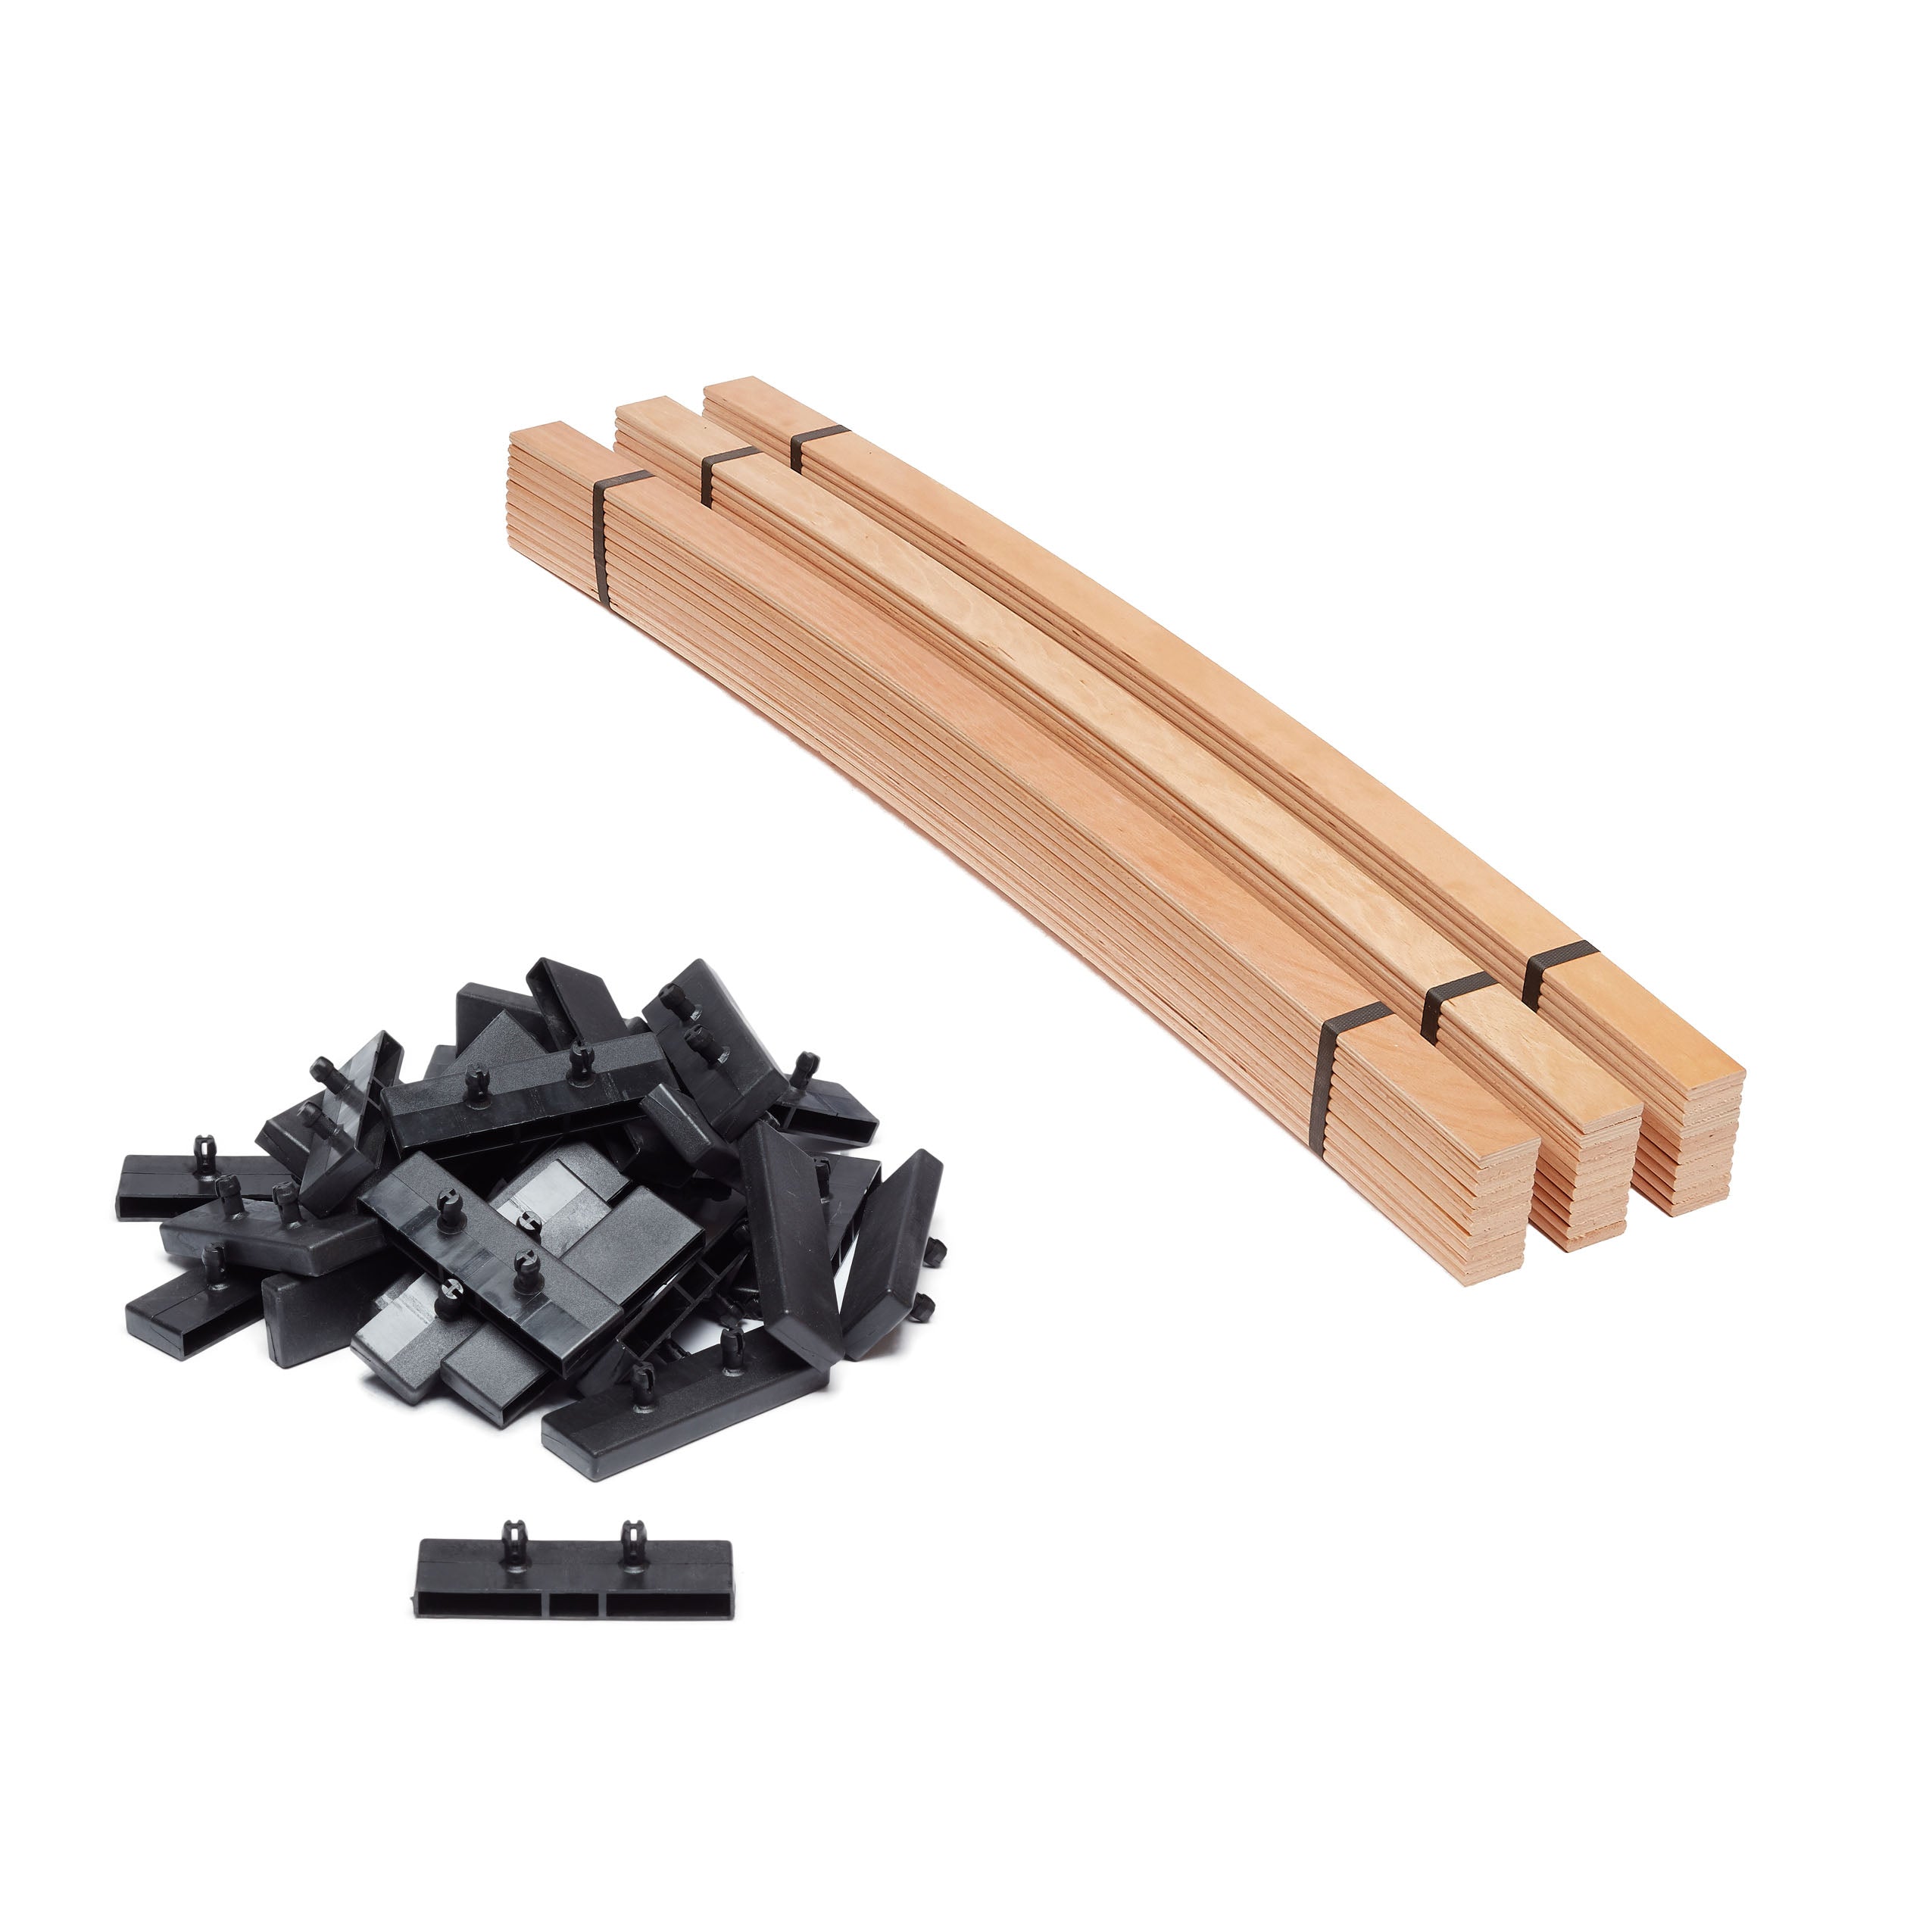 38mm x 8mm Single Row Sprung Bed Slat Kit with Standard Side Holders for Metal Tubular Bed Bases